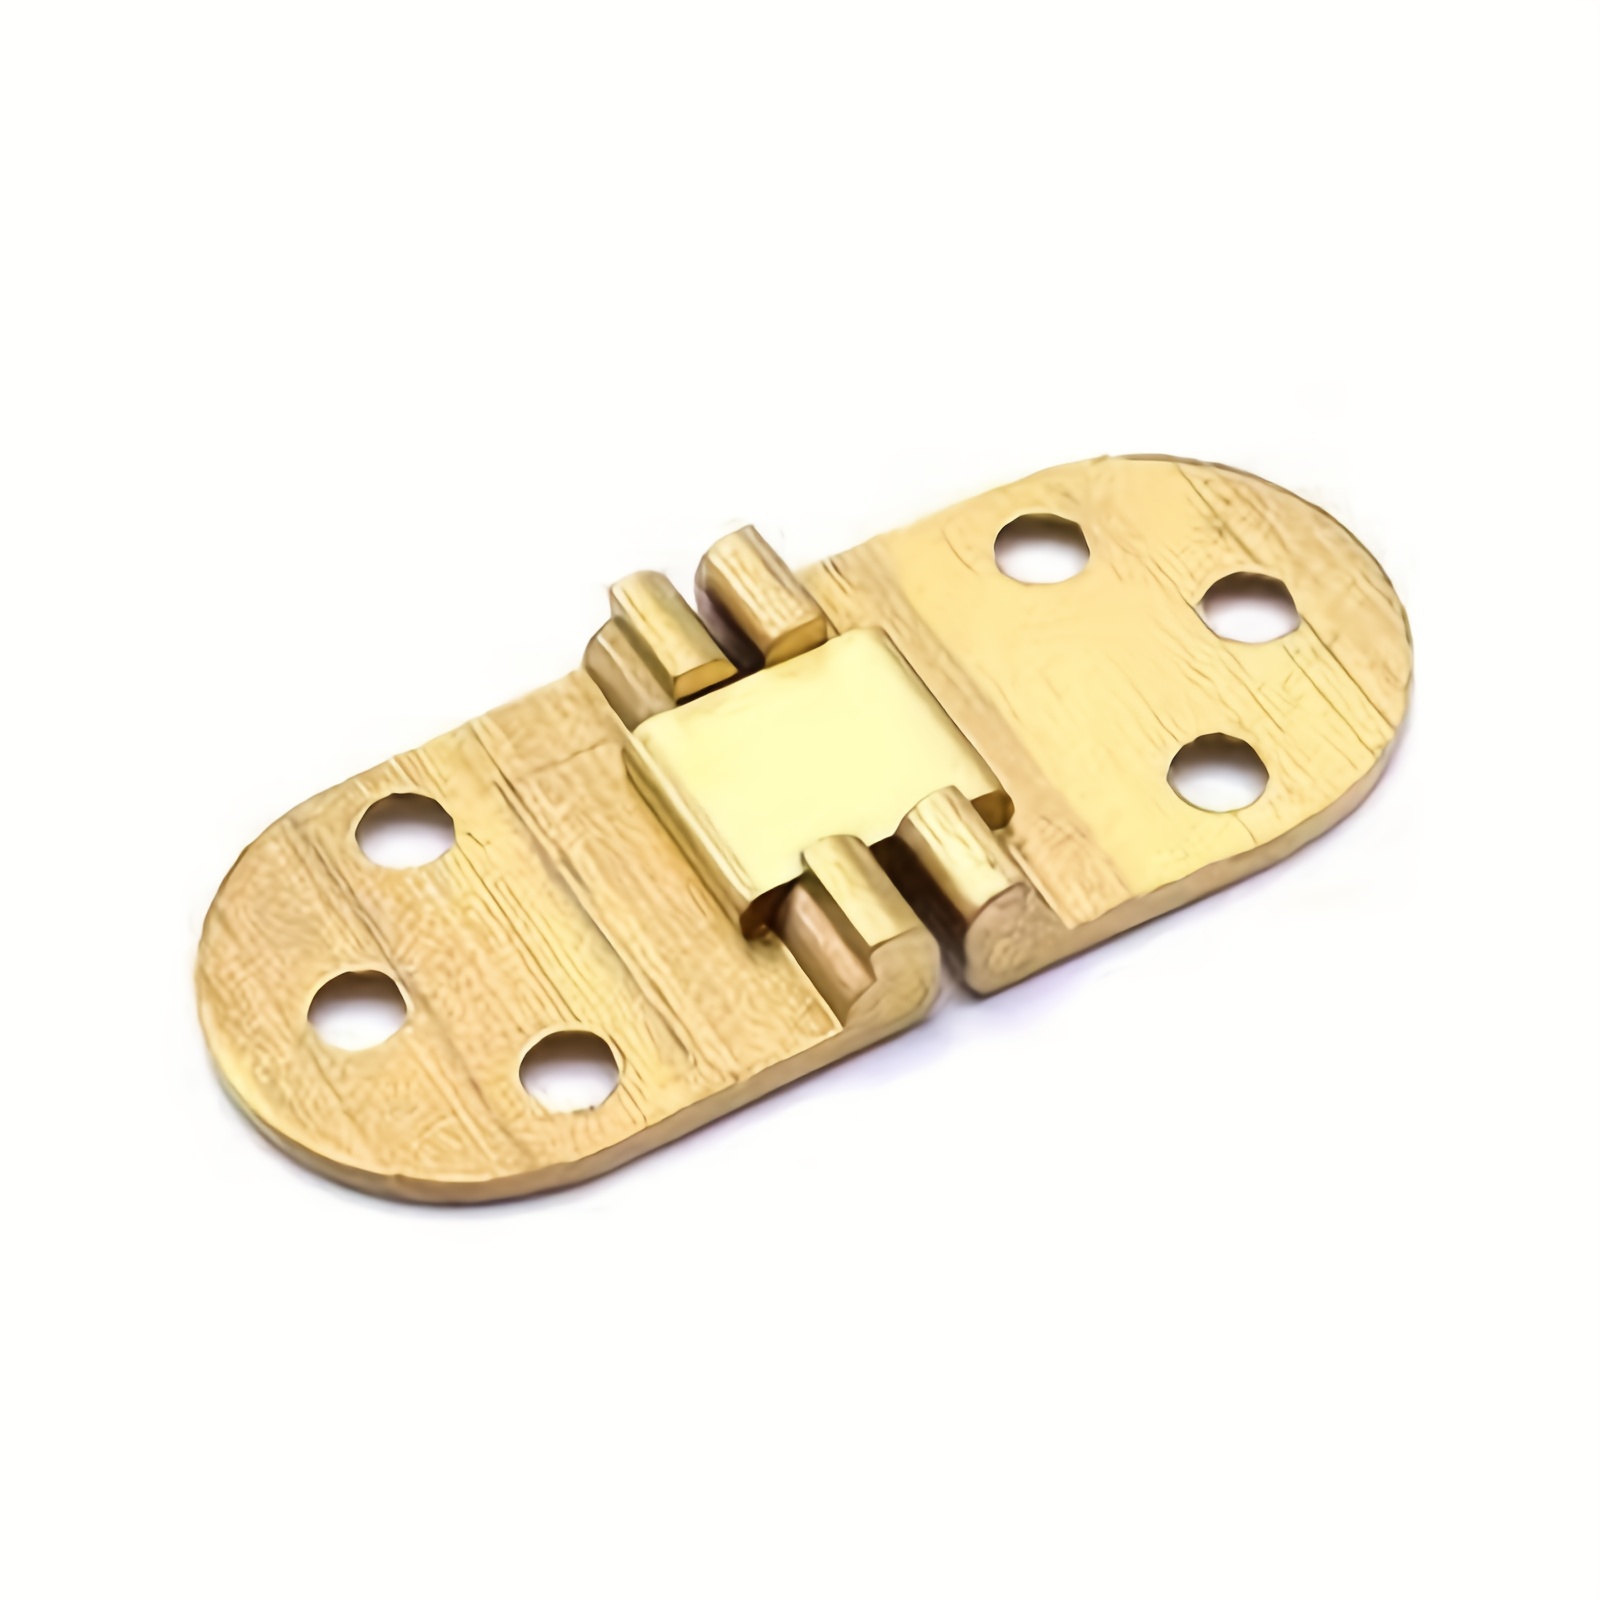 4pcs Round Edge Hinge Brass Butler Tray Hinge Round Edge 180 Degree For  Butler Folding Tables Furniture Table With Screws